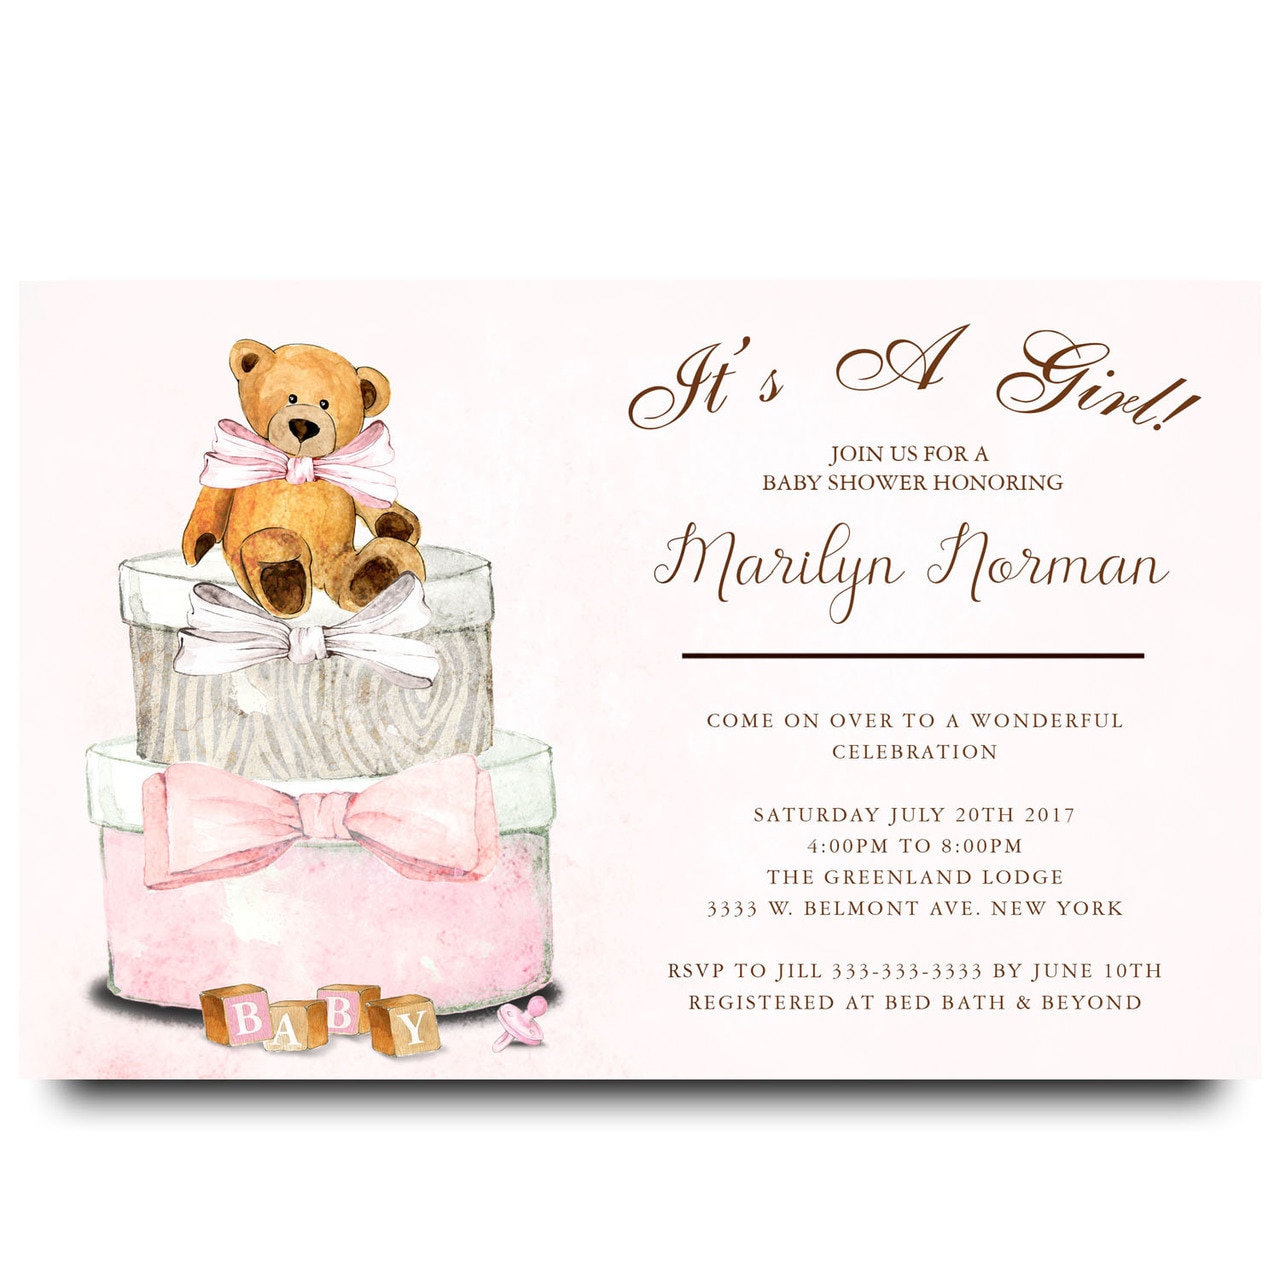 Full Size of Baby Shower:63+ Delightful Cheap Baby Shower Invitations Image Inspirations Cheap Baby Shower Invitations Adornos Para Baby Shower Girl Baby Shower Baby Shower Para Niño Baby Shower Video Teddy Bear Gift Boxs Pink Teddy Bear Watercolor Baby Shower